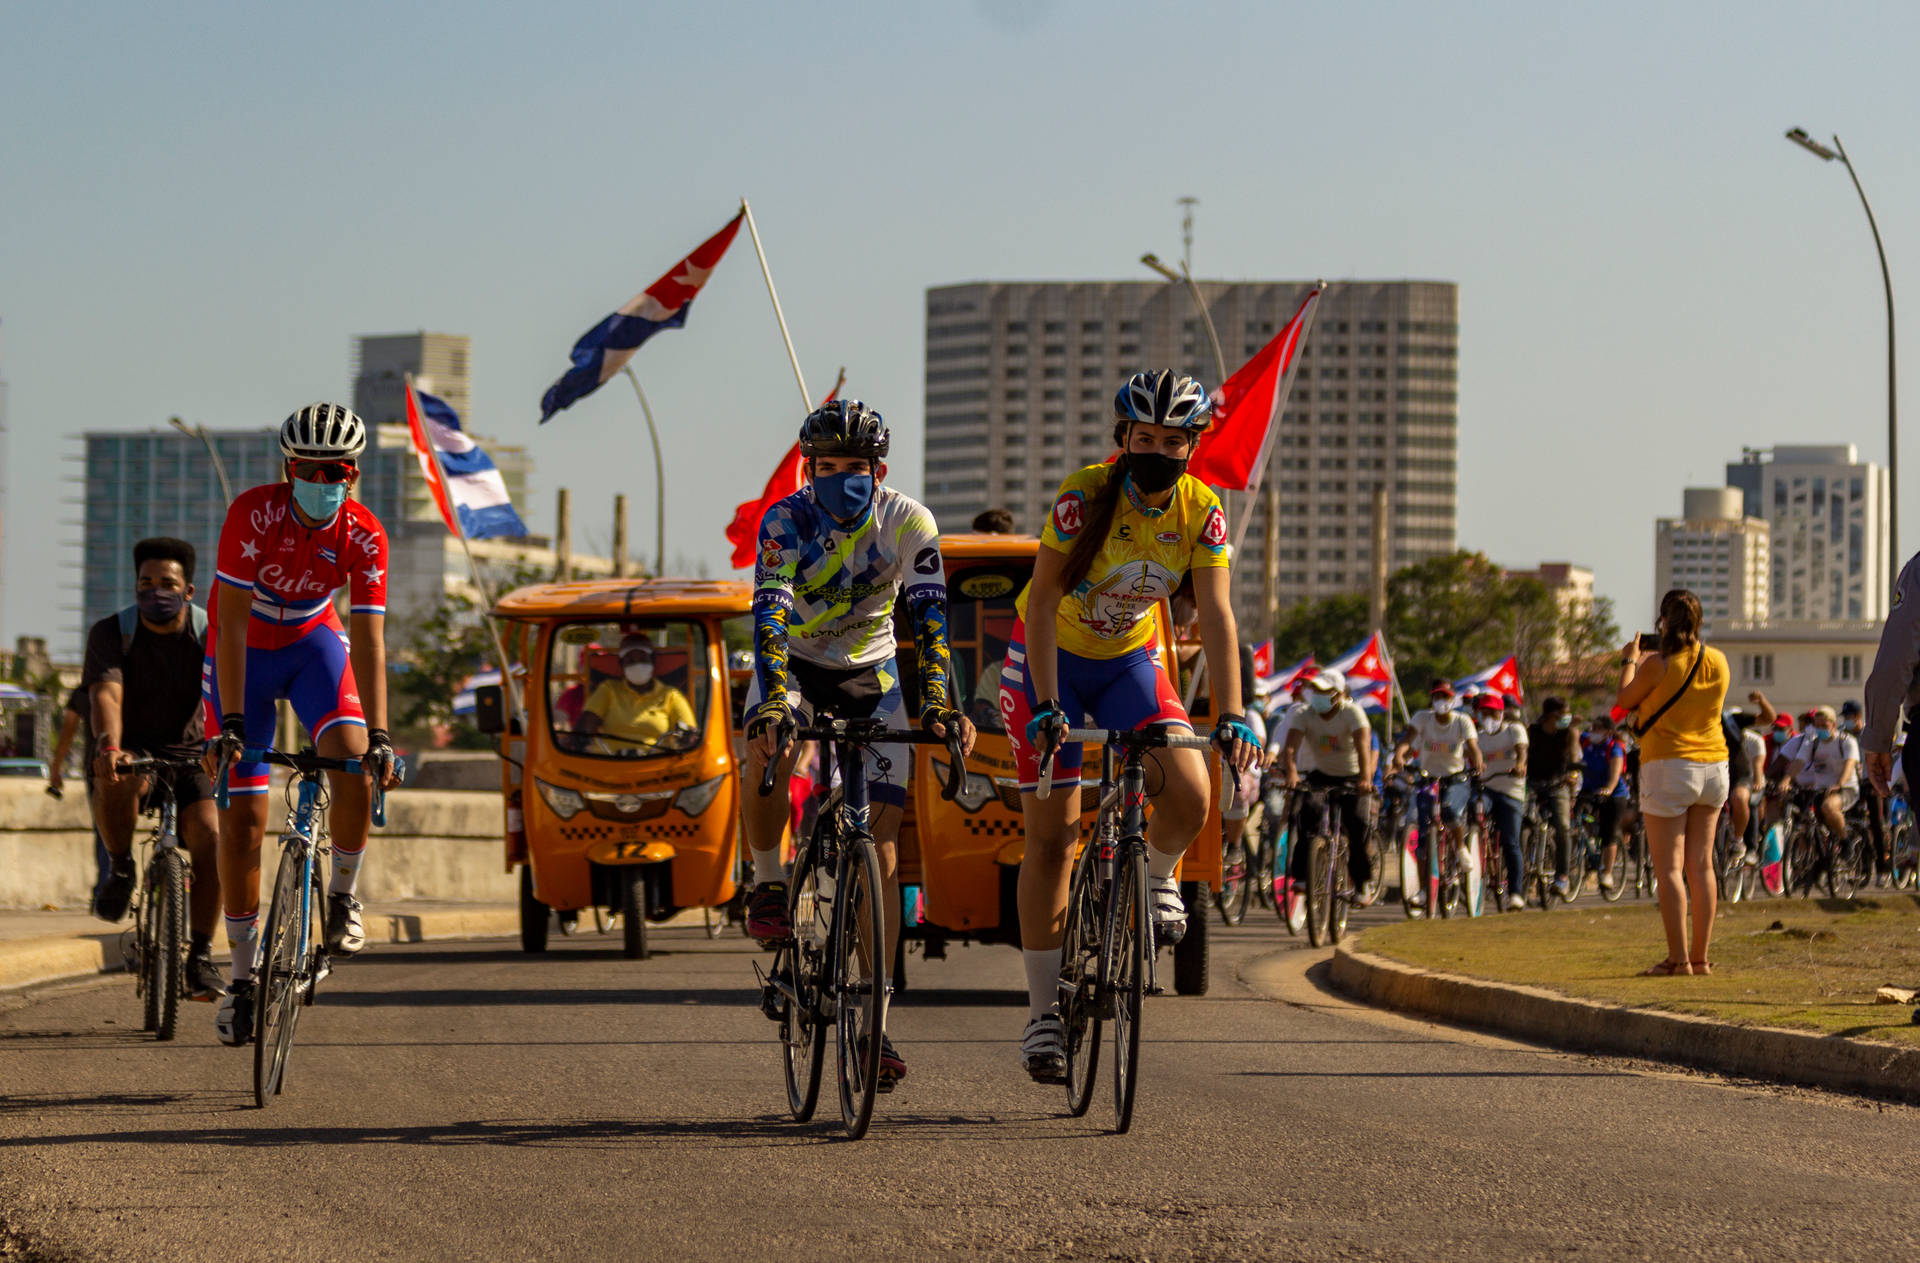 Bicycle Race In Cuba Background